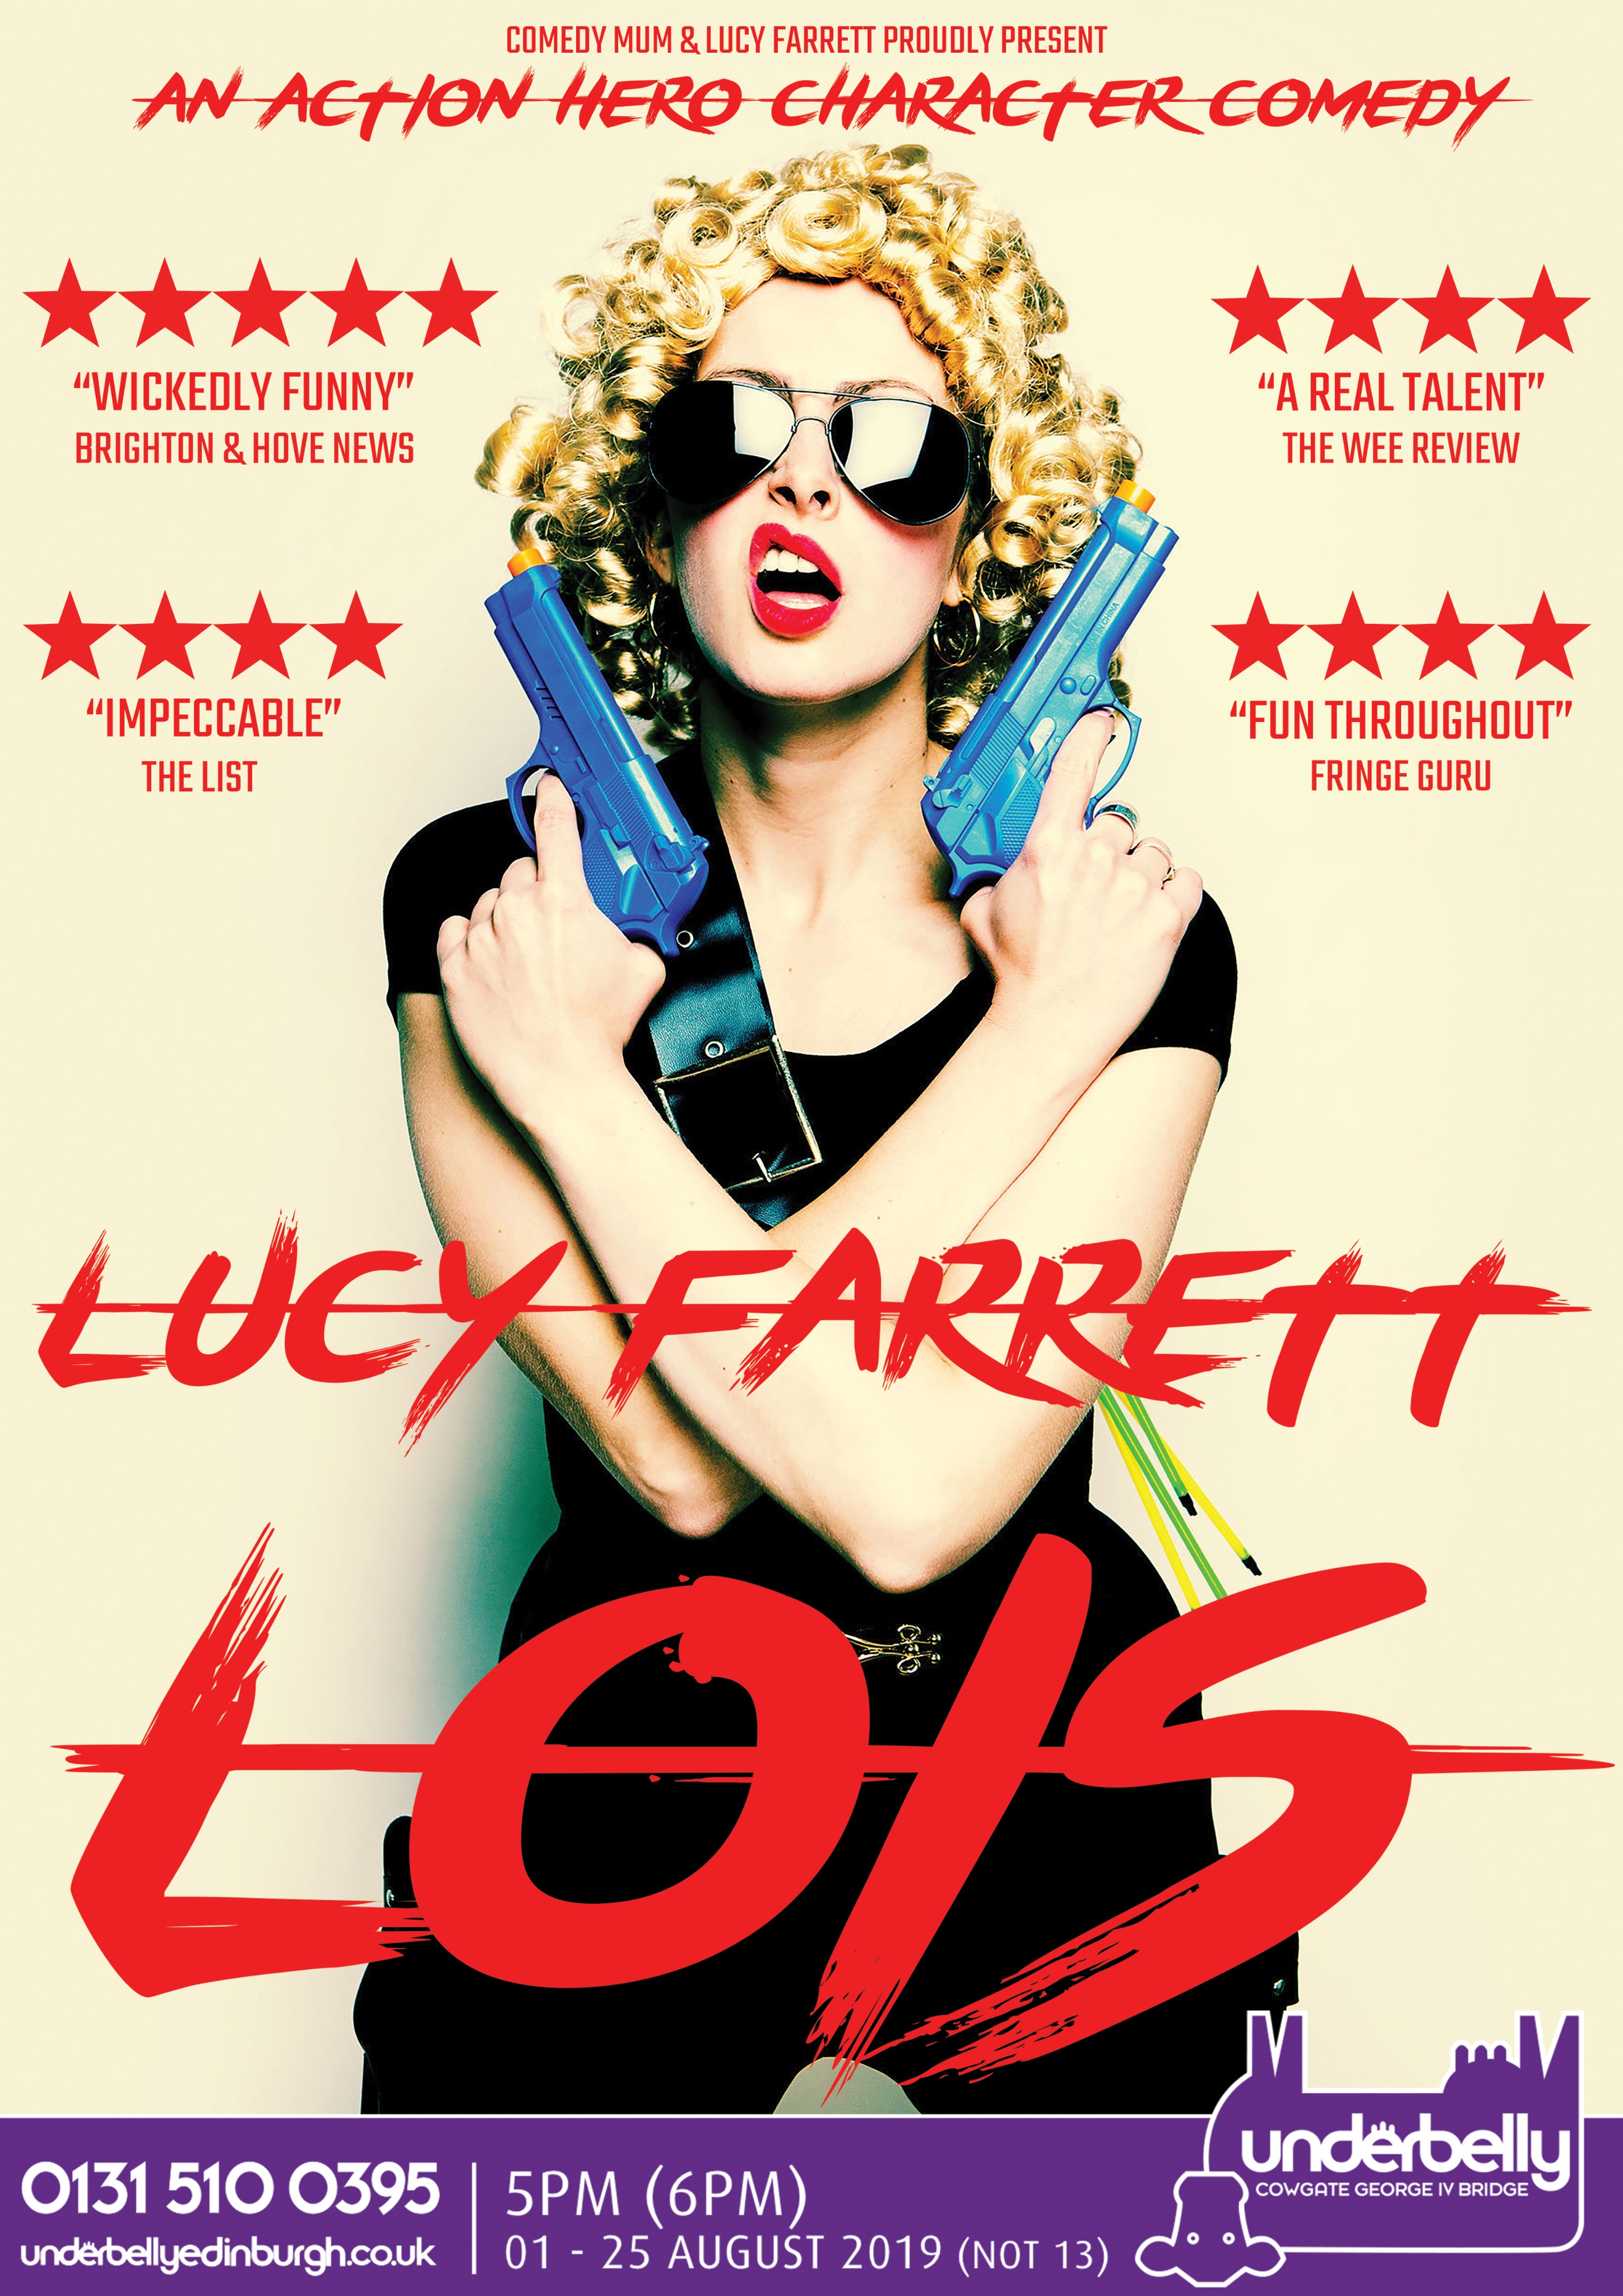 The poster for Lucy Farrett: Lois